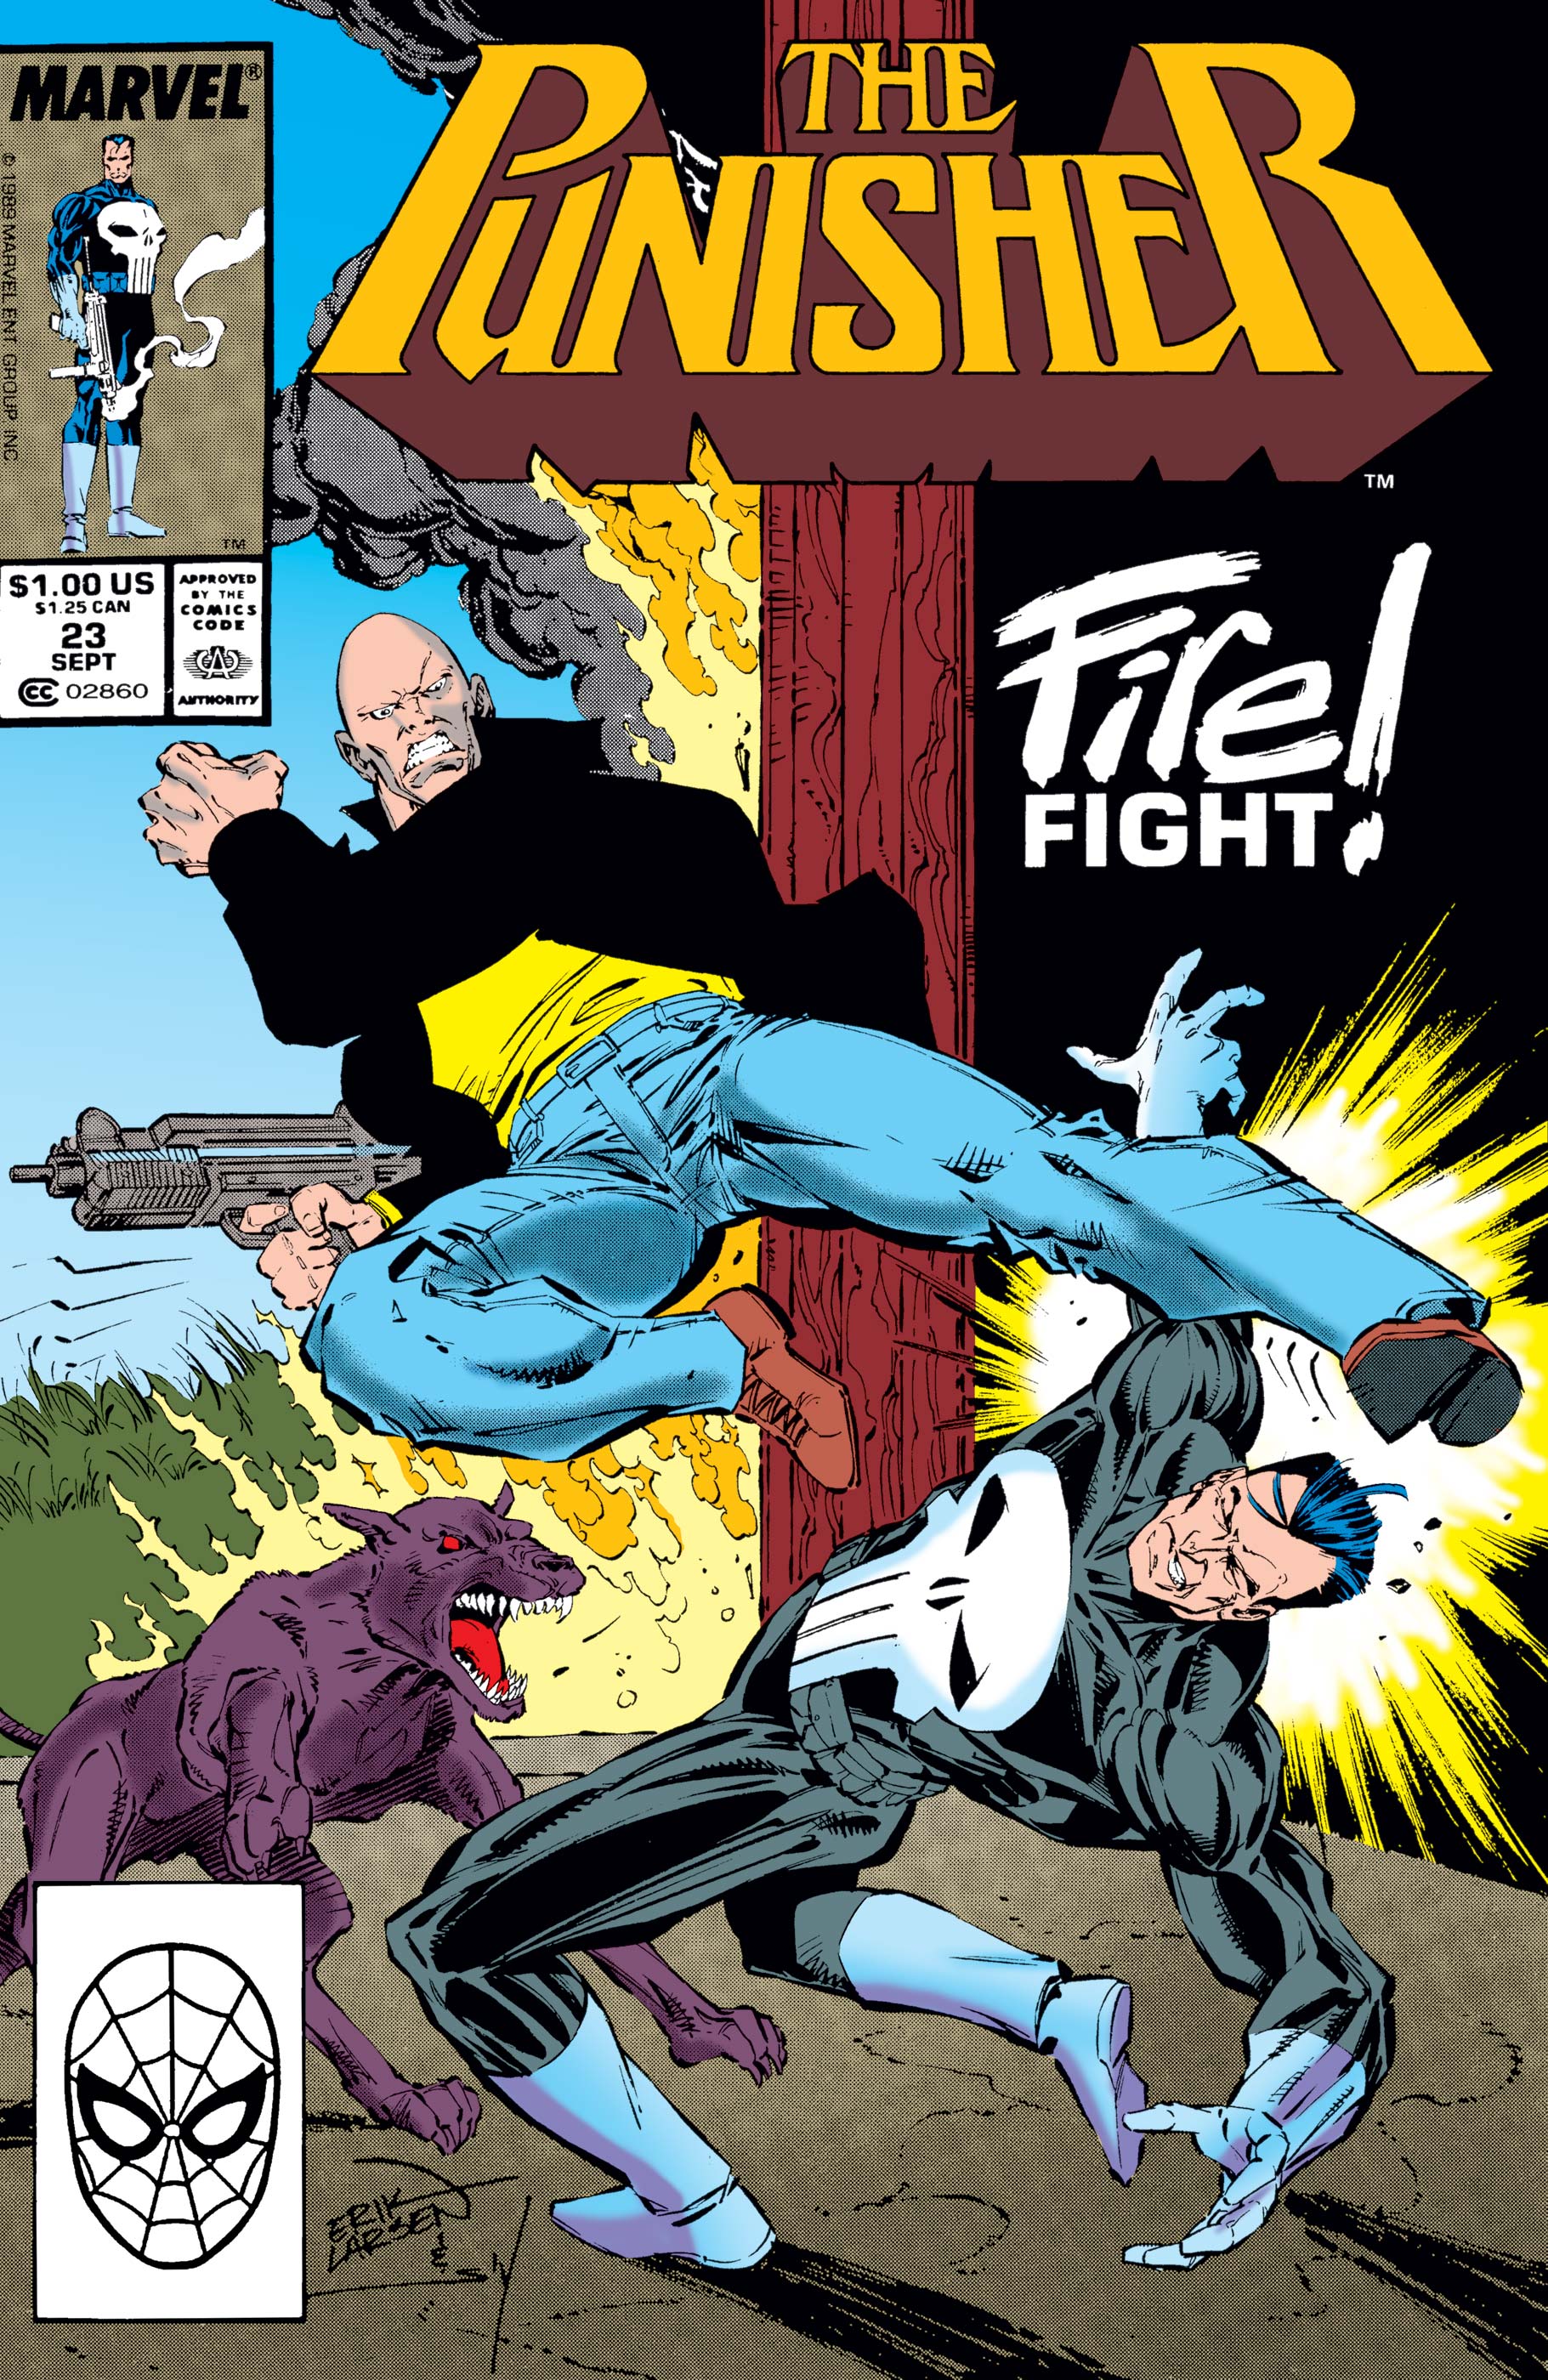 The Punisher (1987) #23